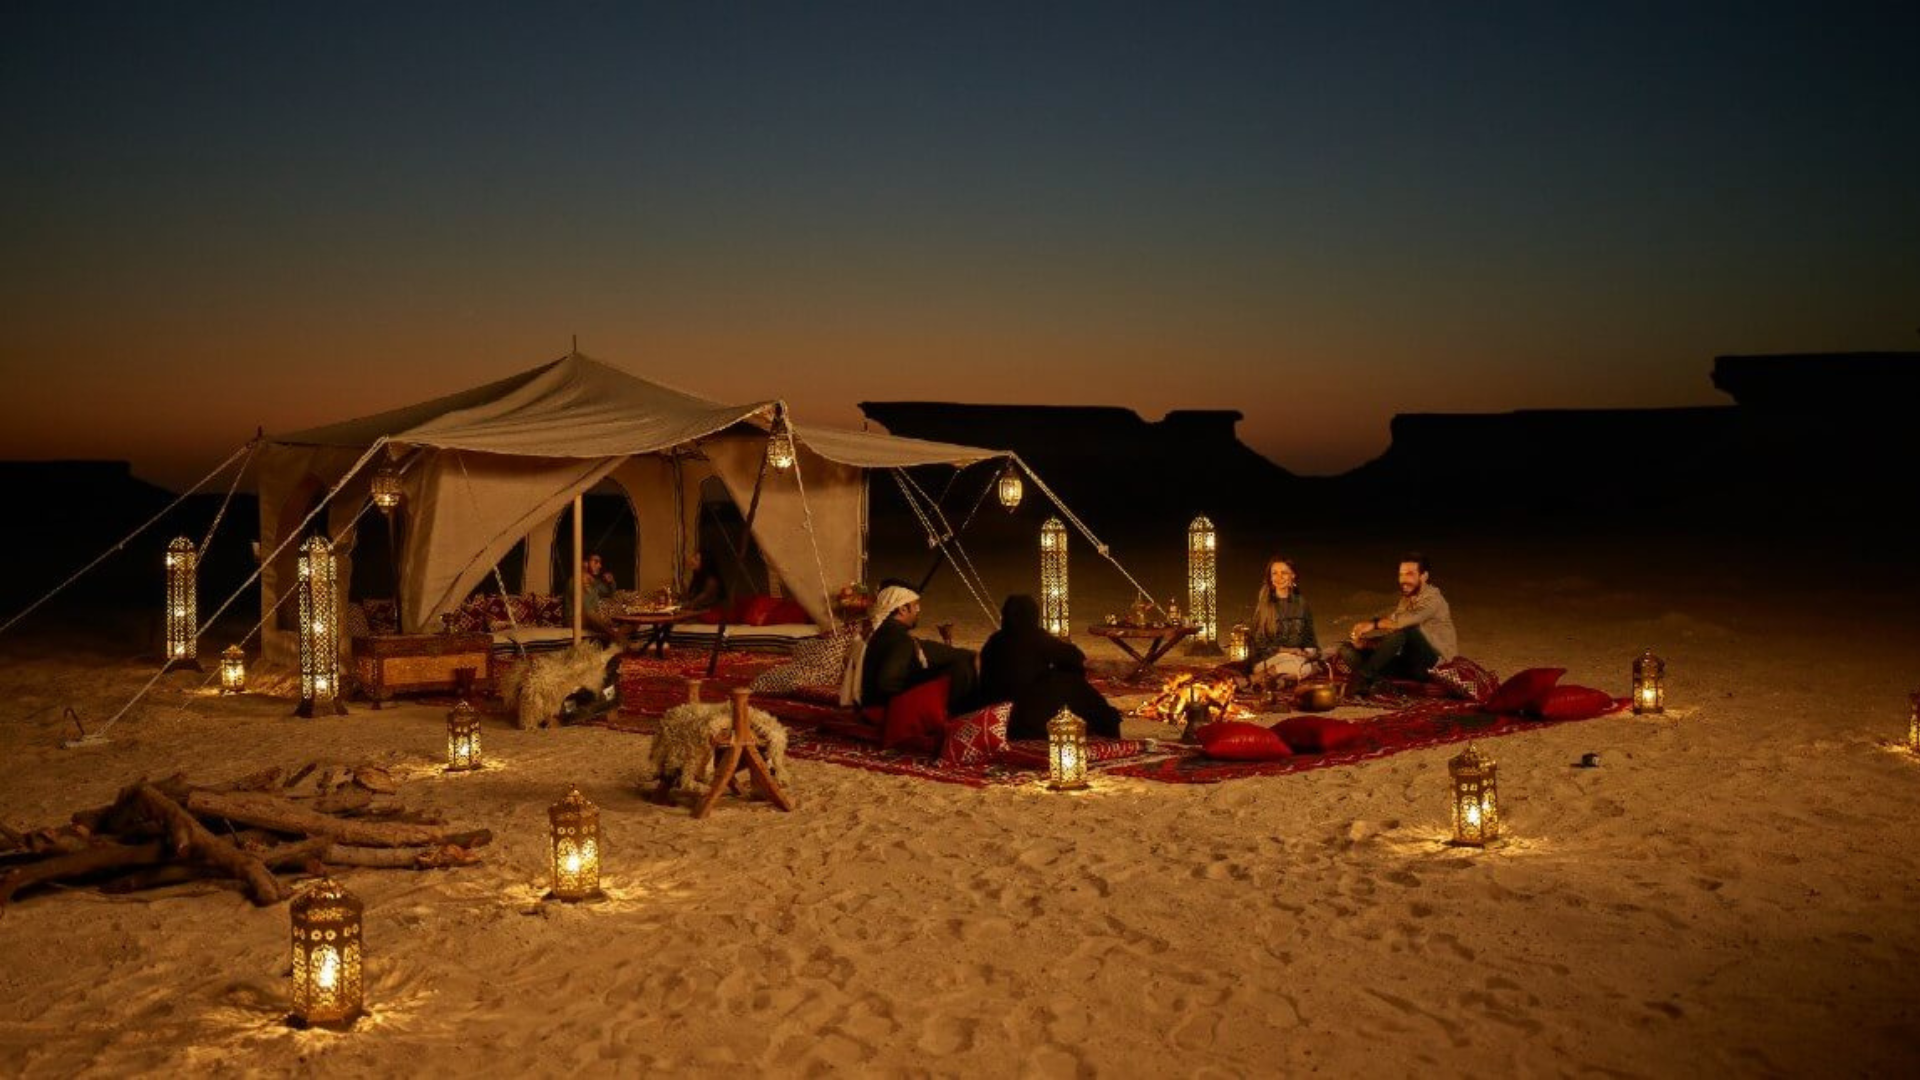 A small tent in the dessert with a group of people